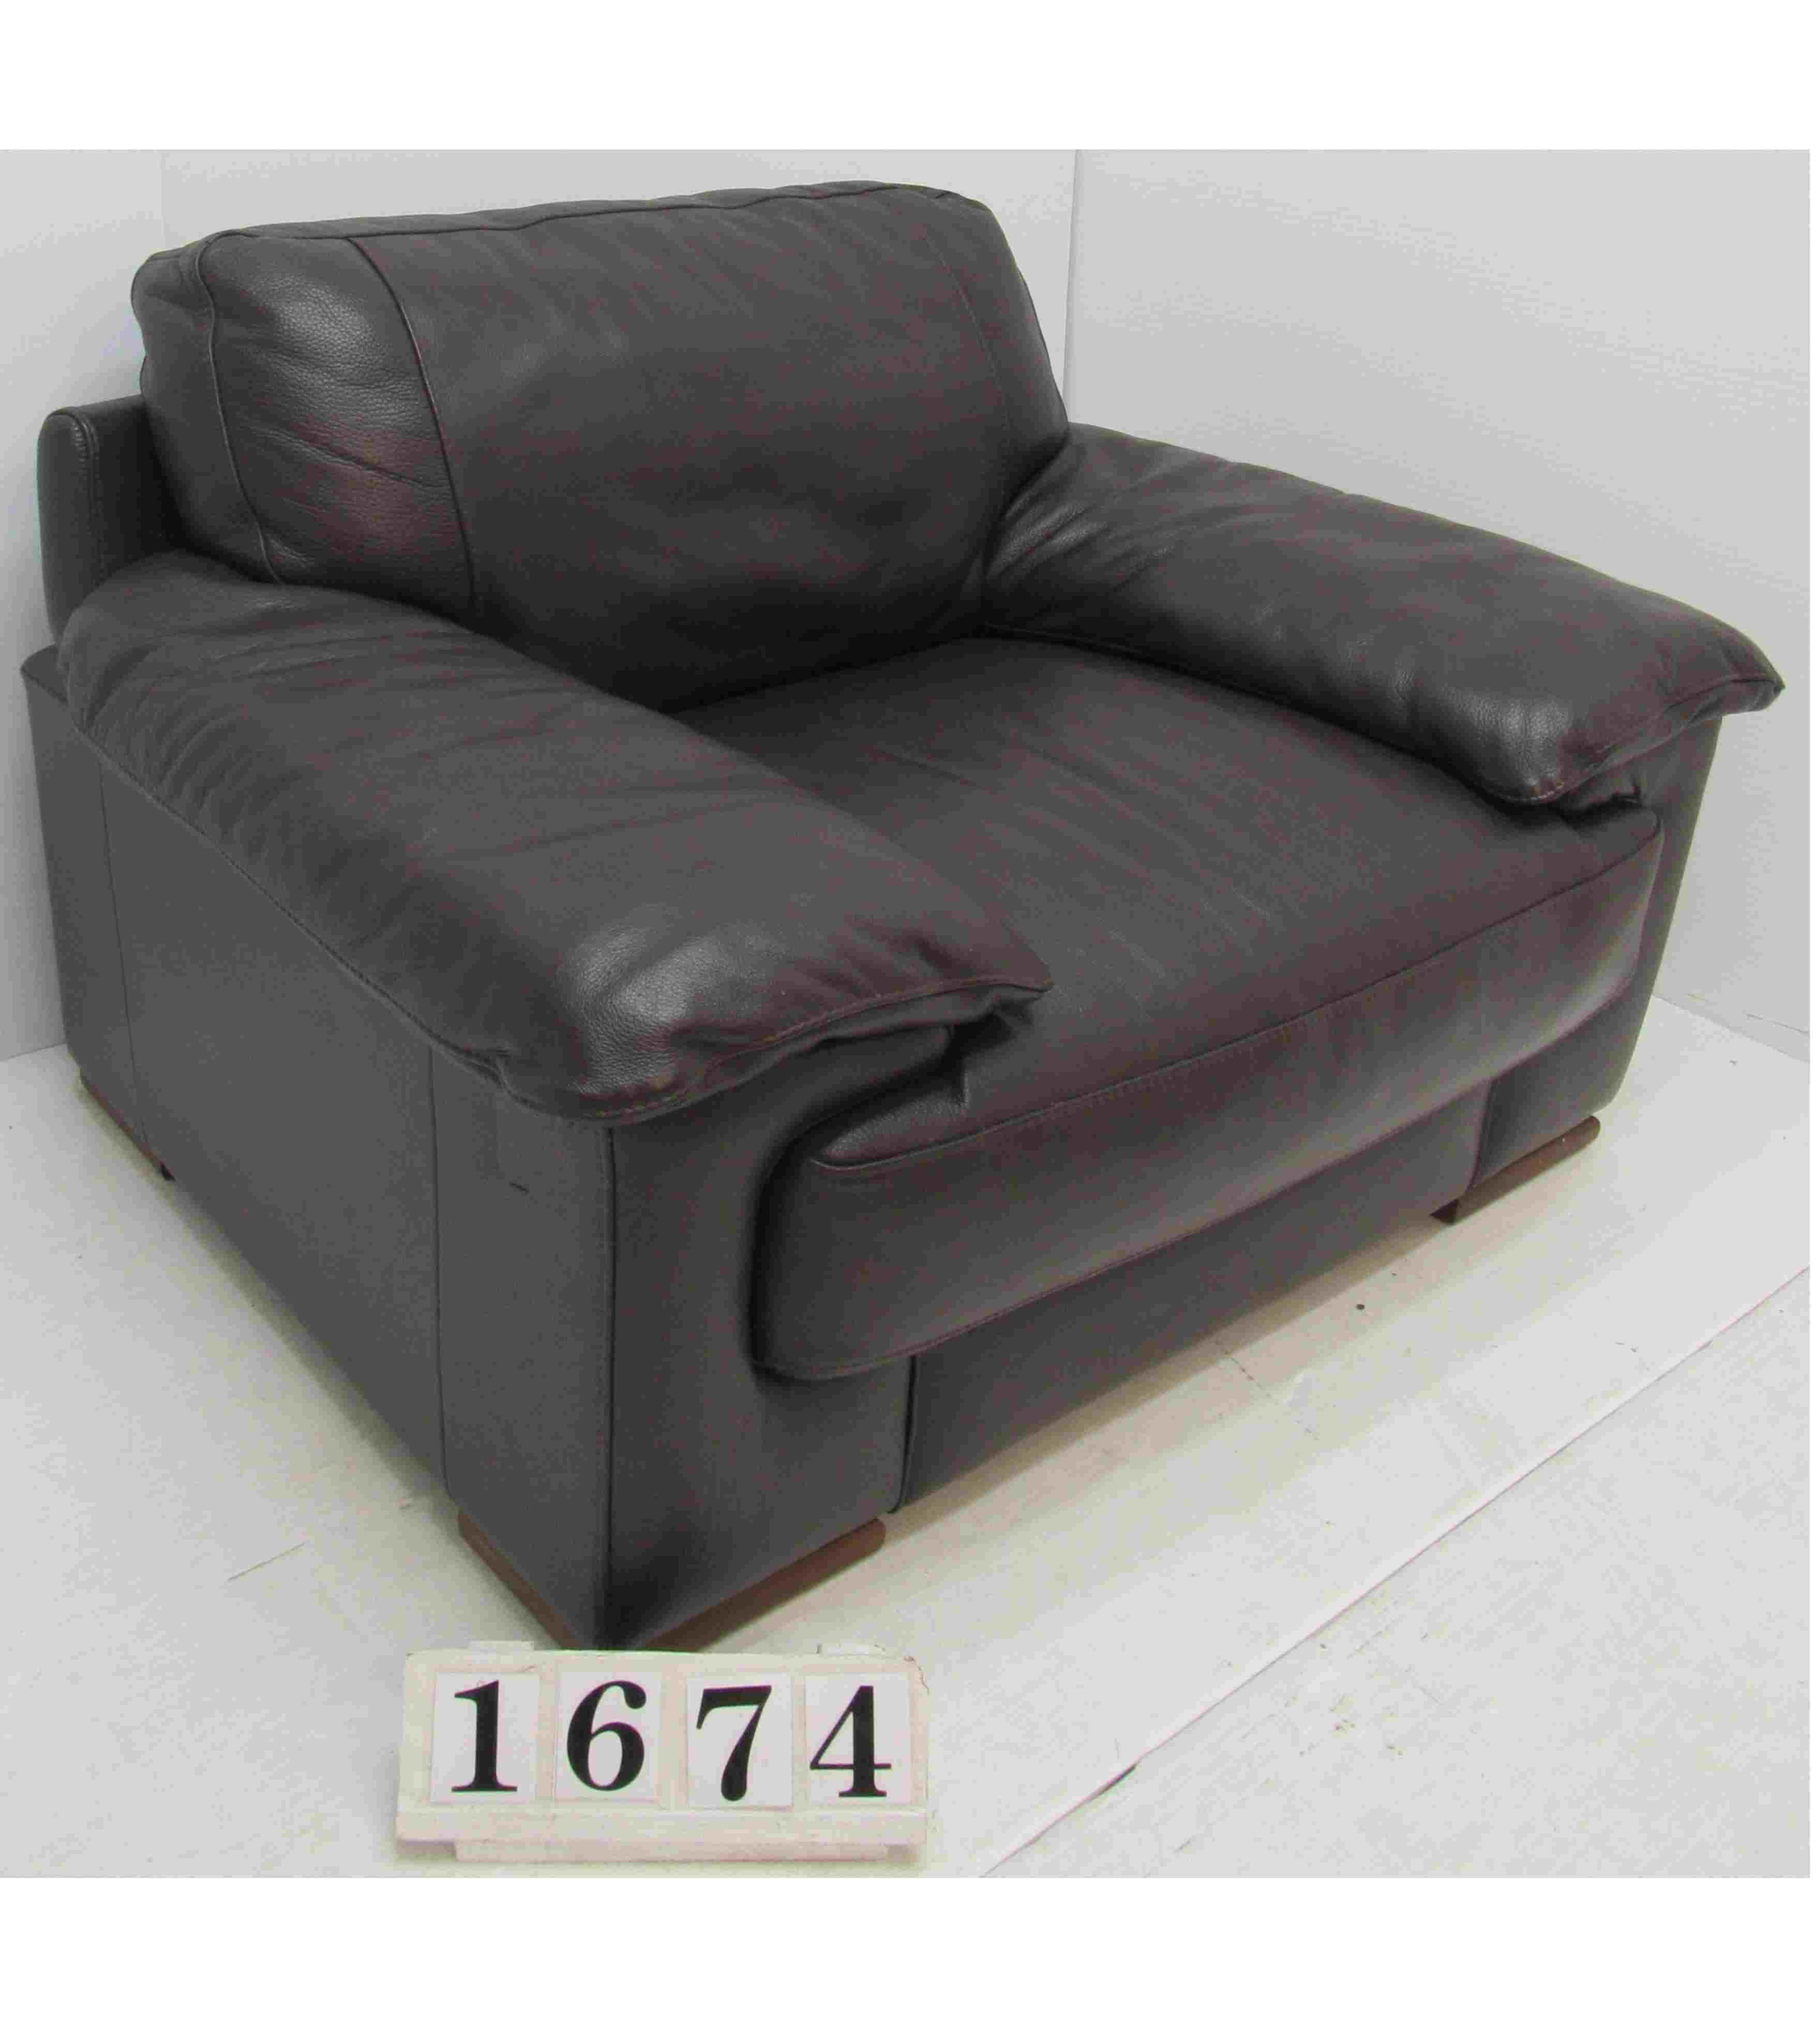 Large brown leather armchair.